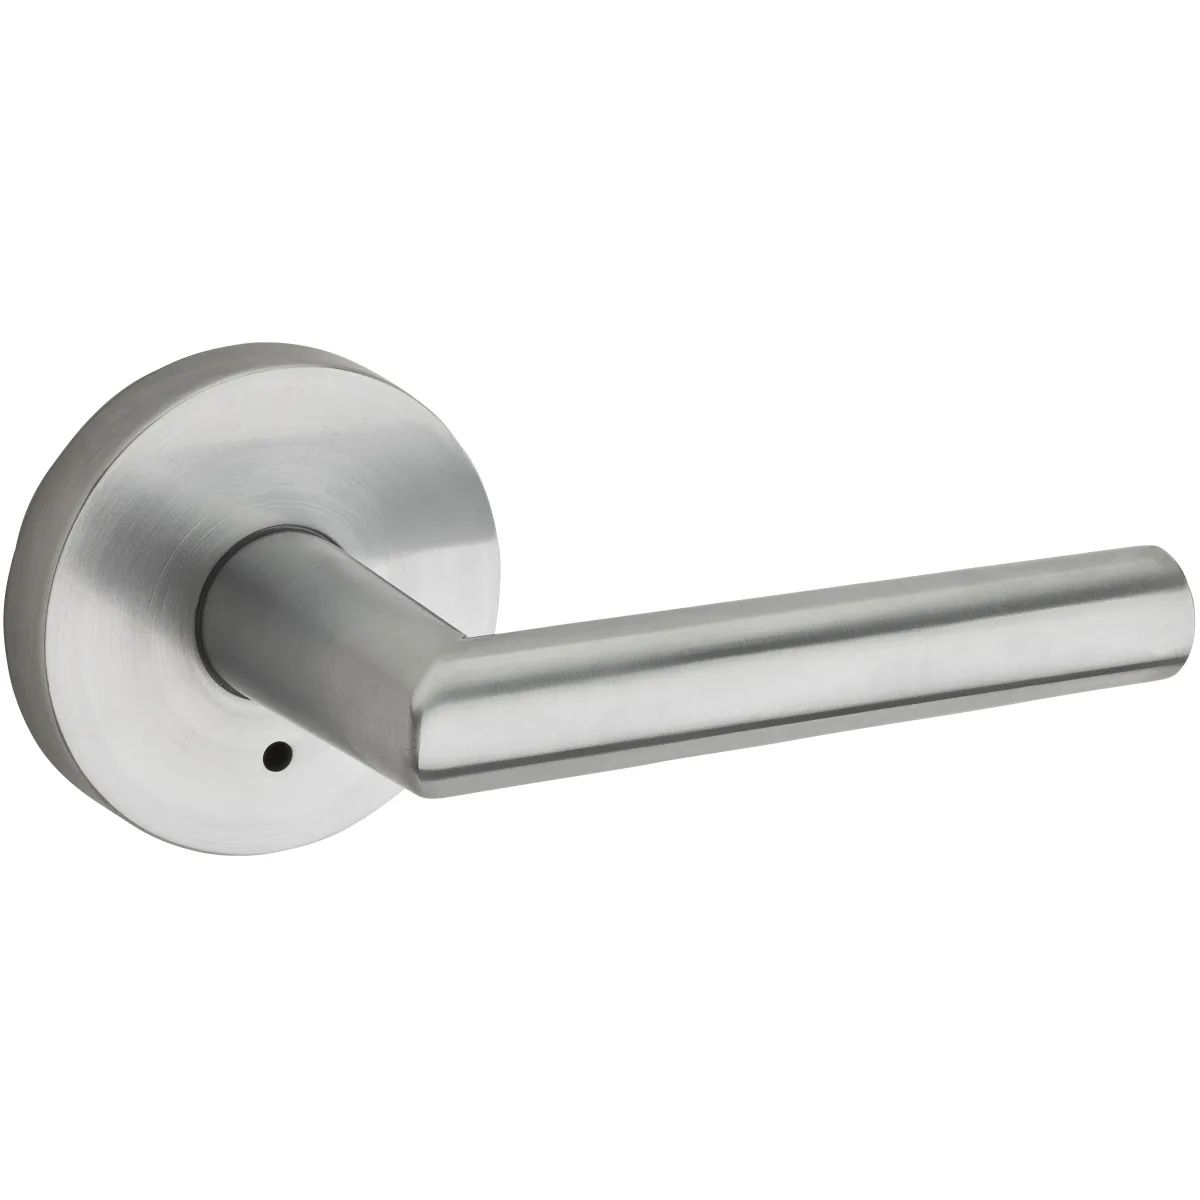 Milan Privacy Door Lever Set with Push Button Lock and Emergency Egress | Build.com, Inc.